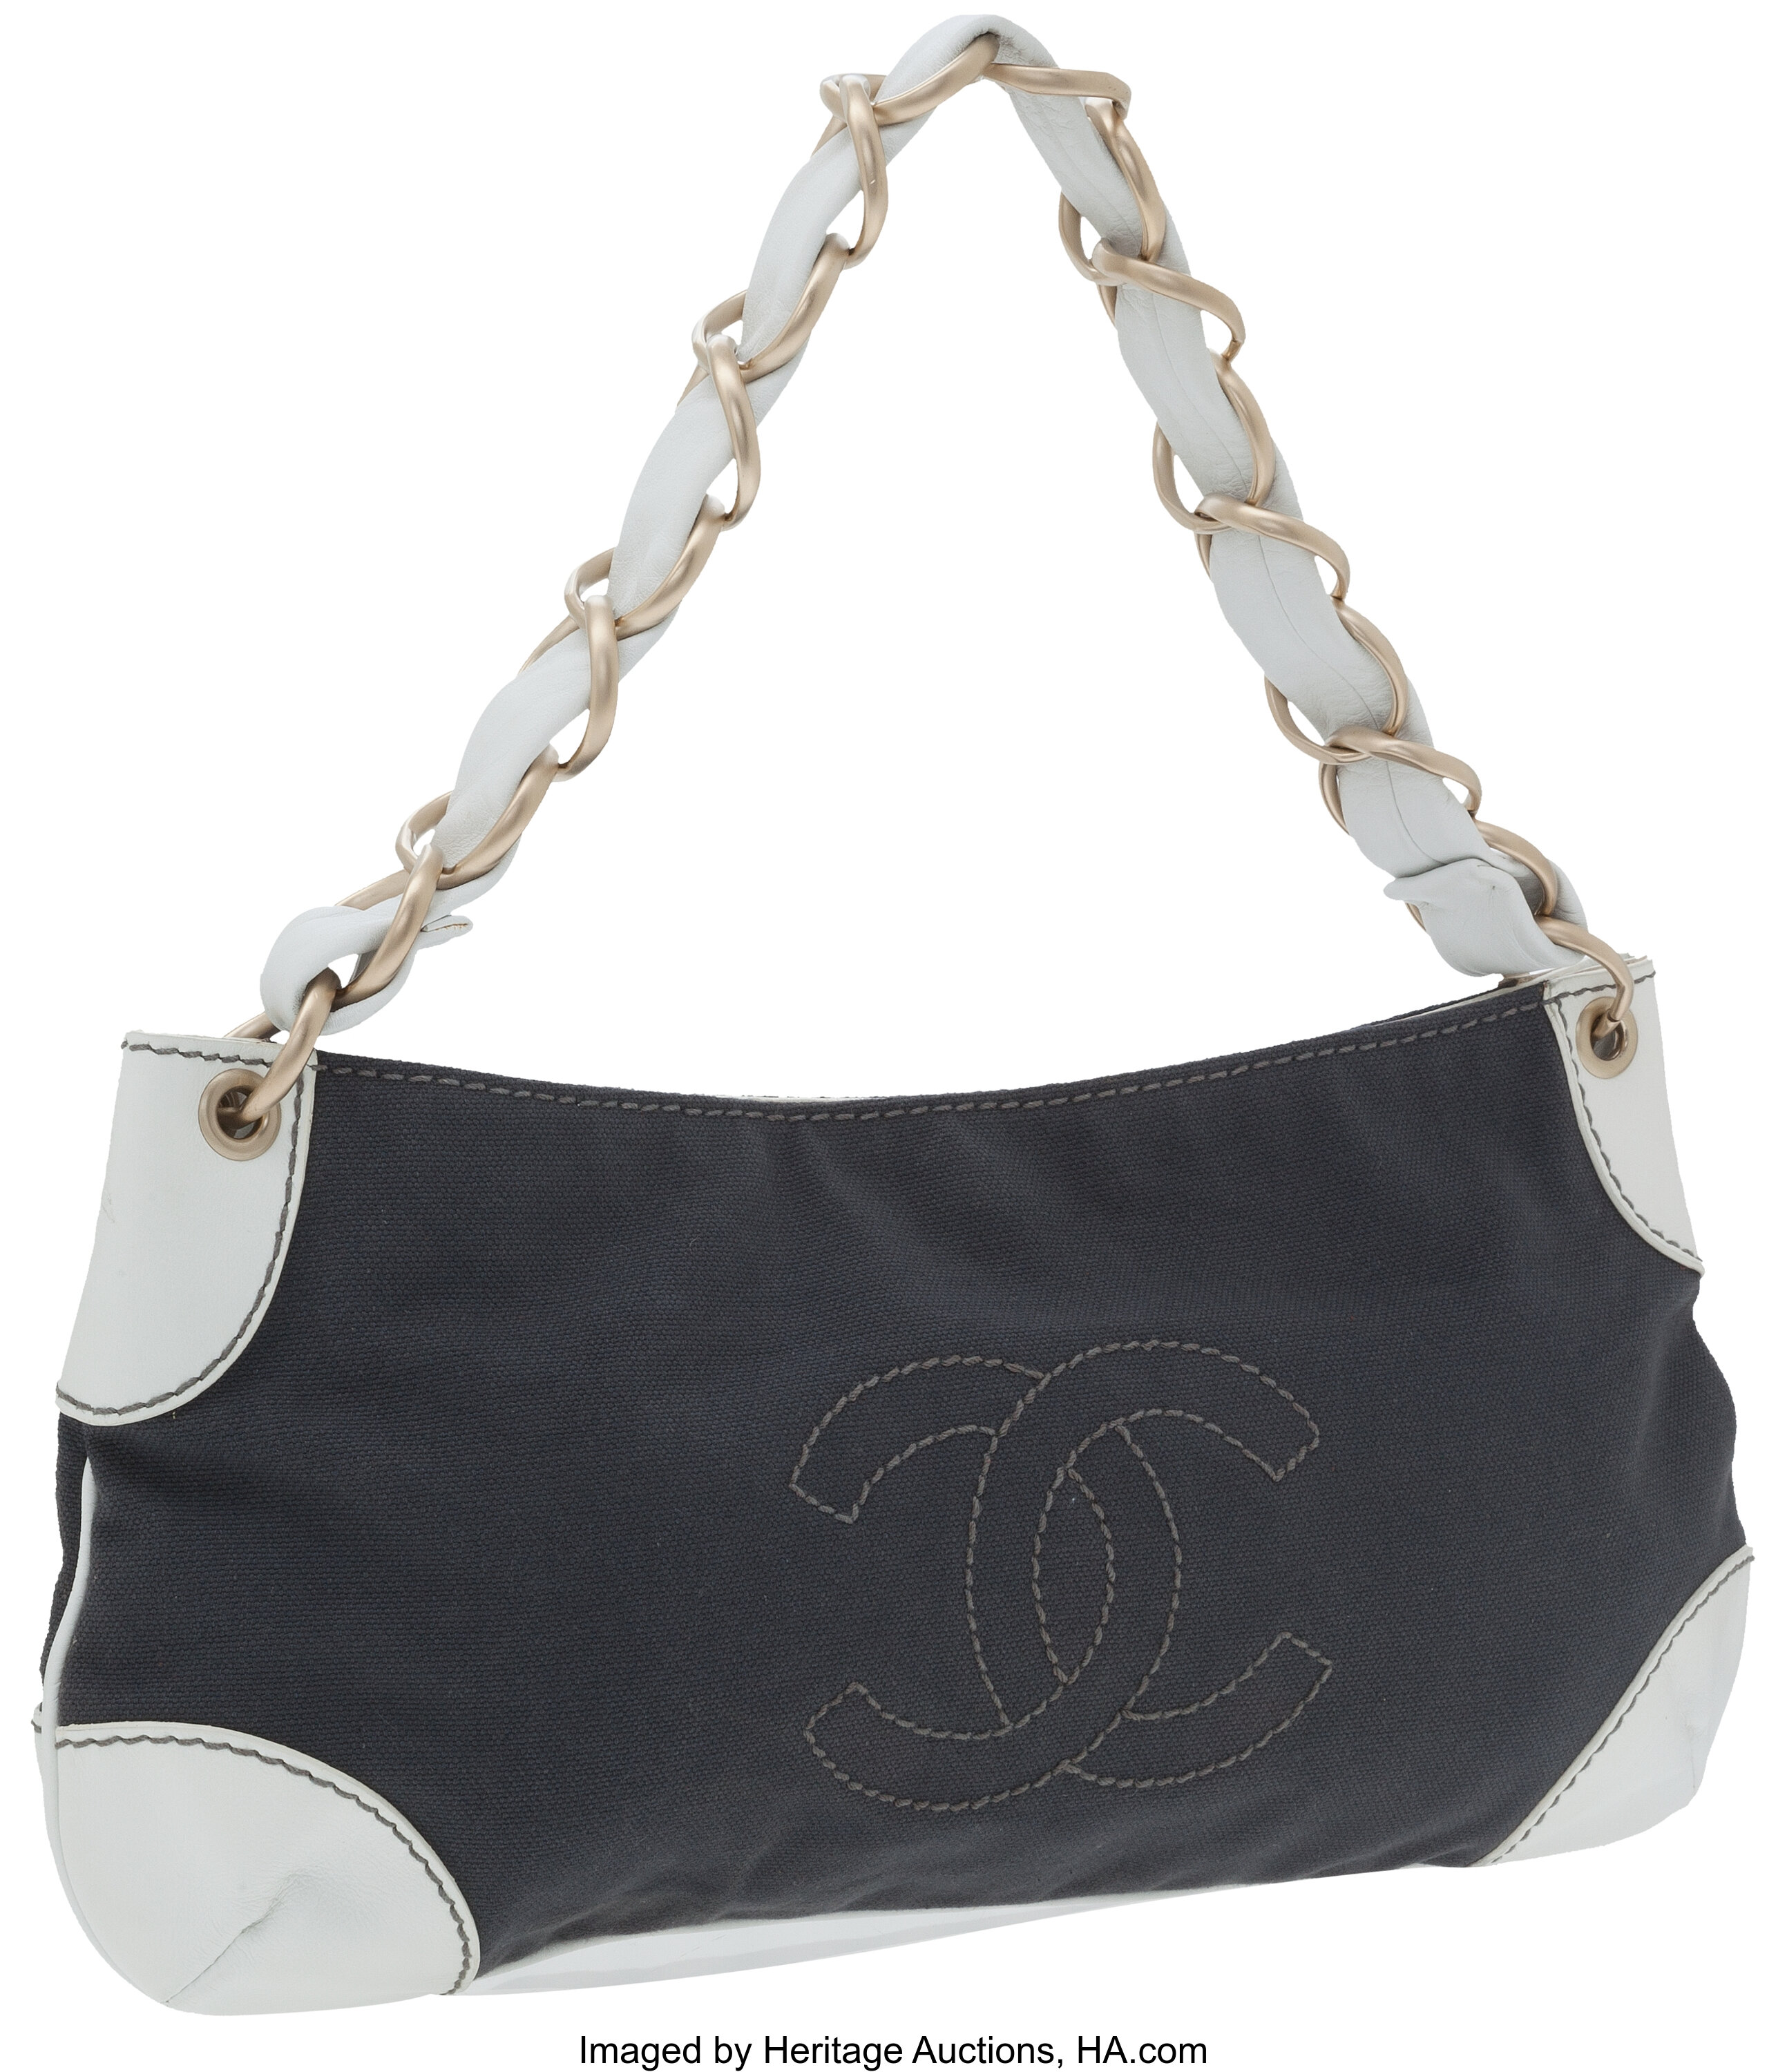 Sold at Auction: Chanel - Gabrielle Large Bag - White Leather CC Gold Silver  Quilted Hobo